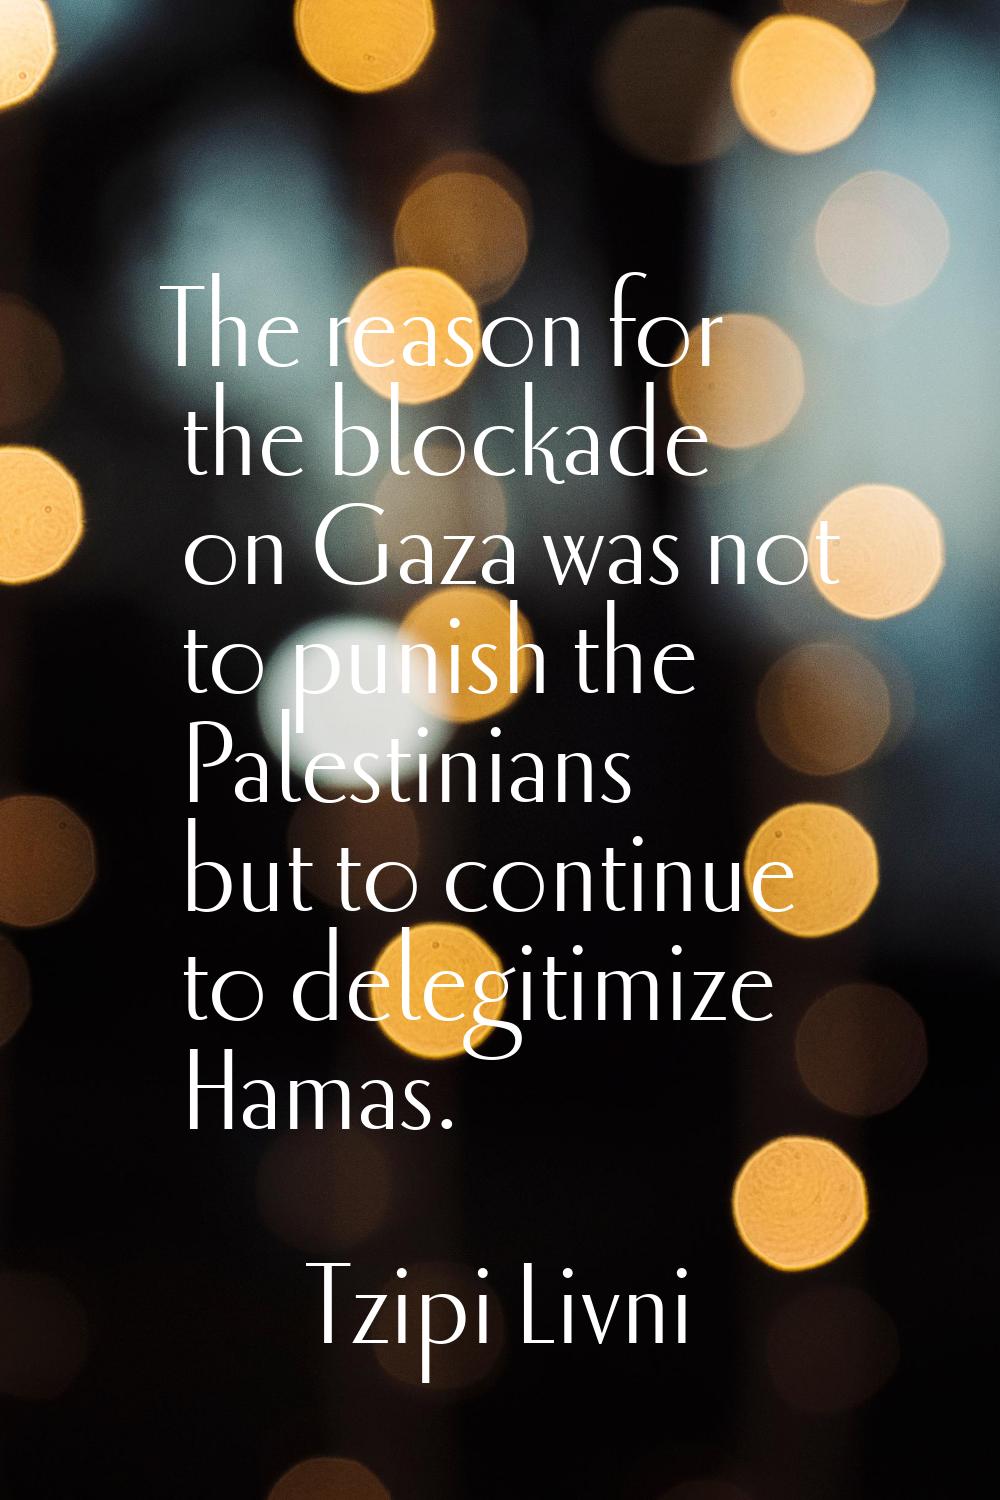 The reason for the blockade on Gaza was not to punish the Palestinians but to continue to delegitim